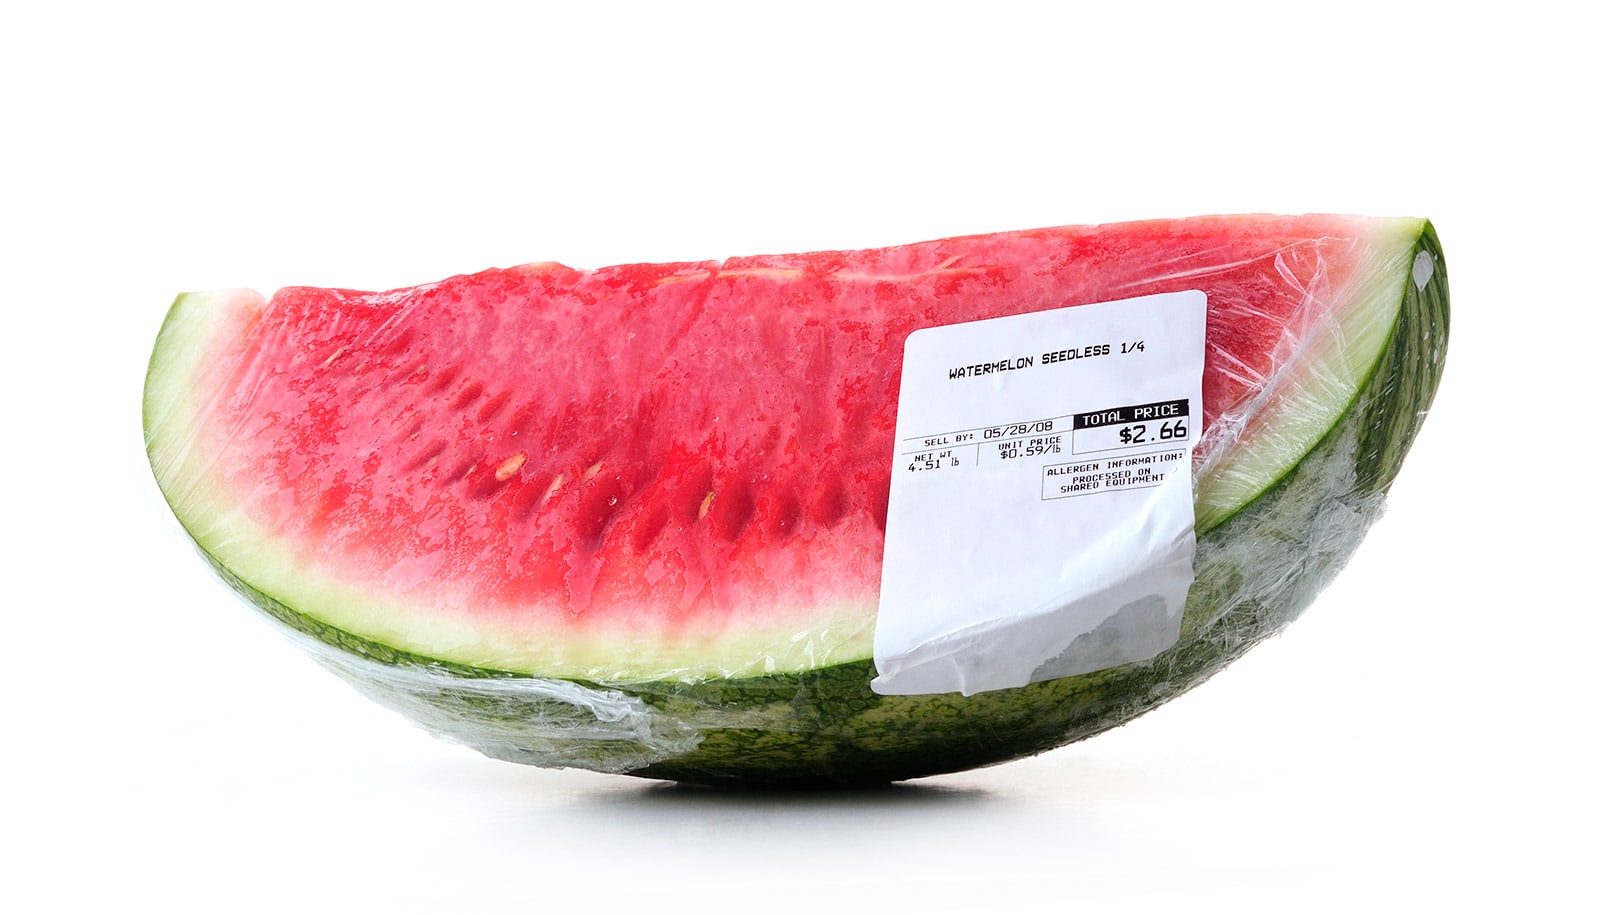 A quarter of watermelon in plastic wrap with a price label on it.